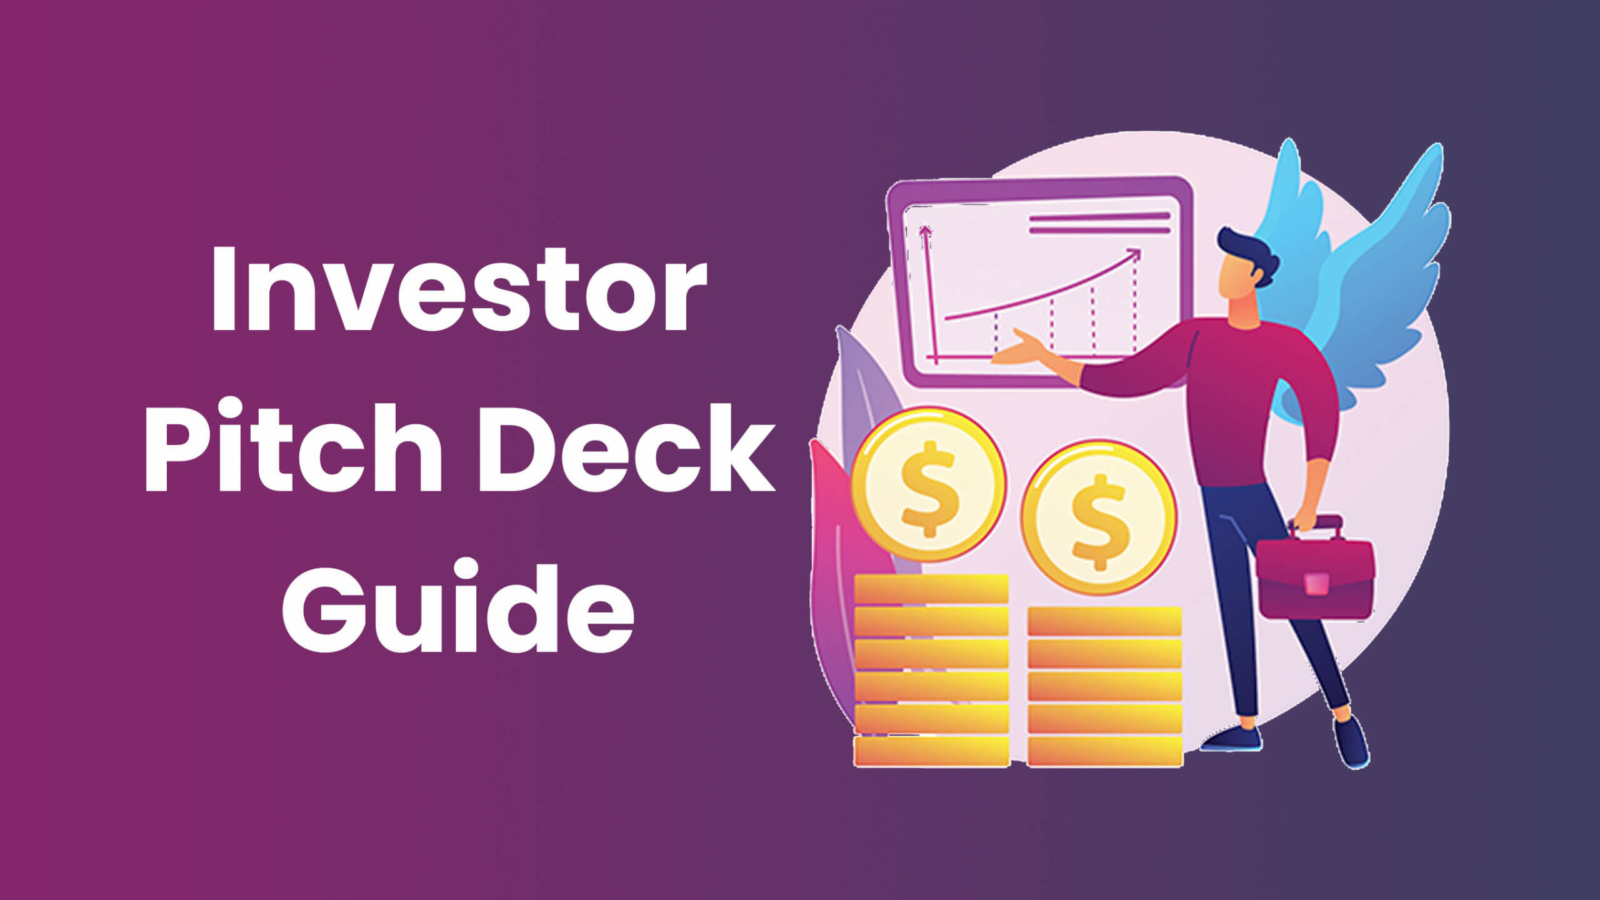 Investor Pitch Deck Guide